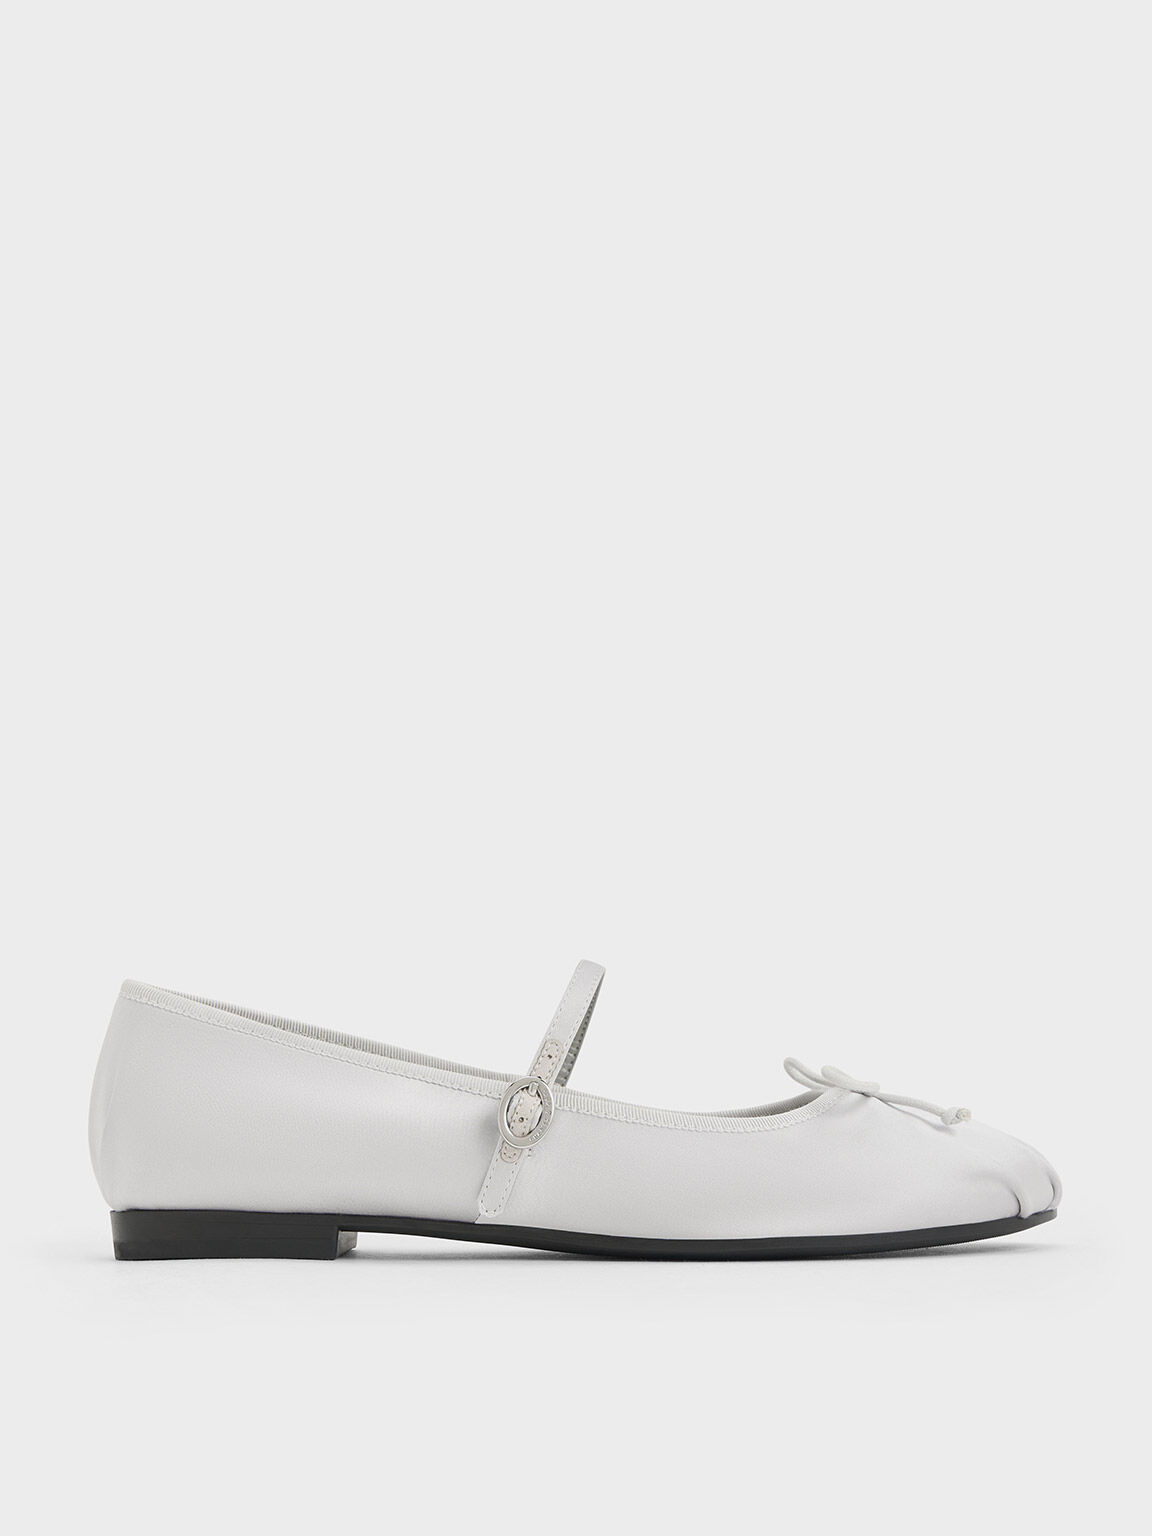 Back In Stock Styles | Shop Women’s Shoes | CHARLES & KEITH SG